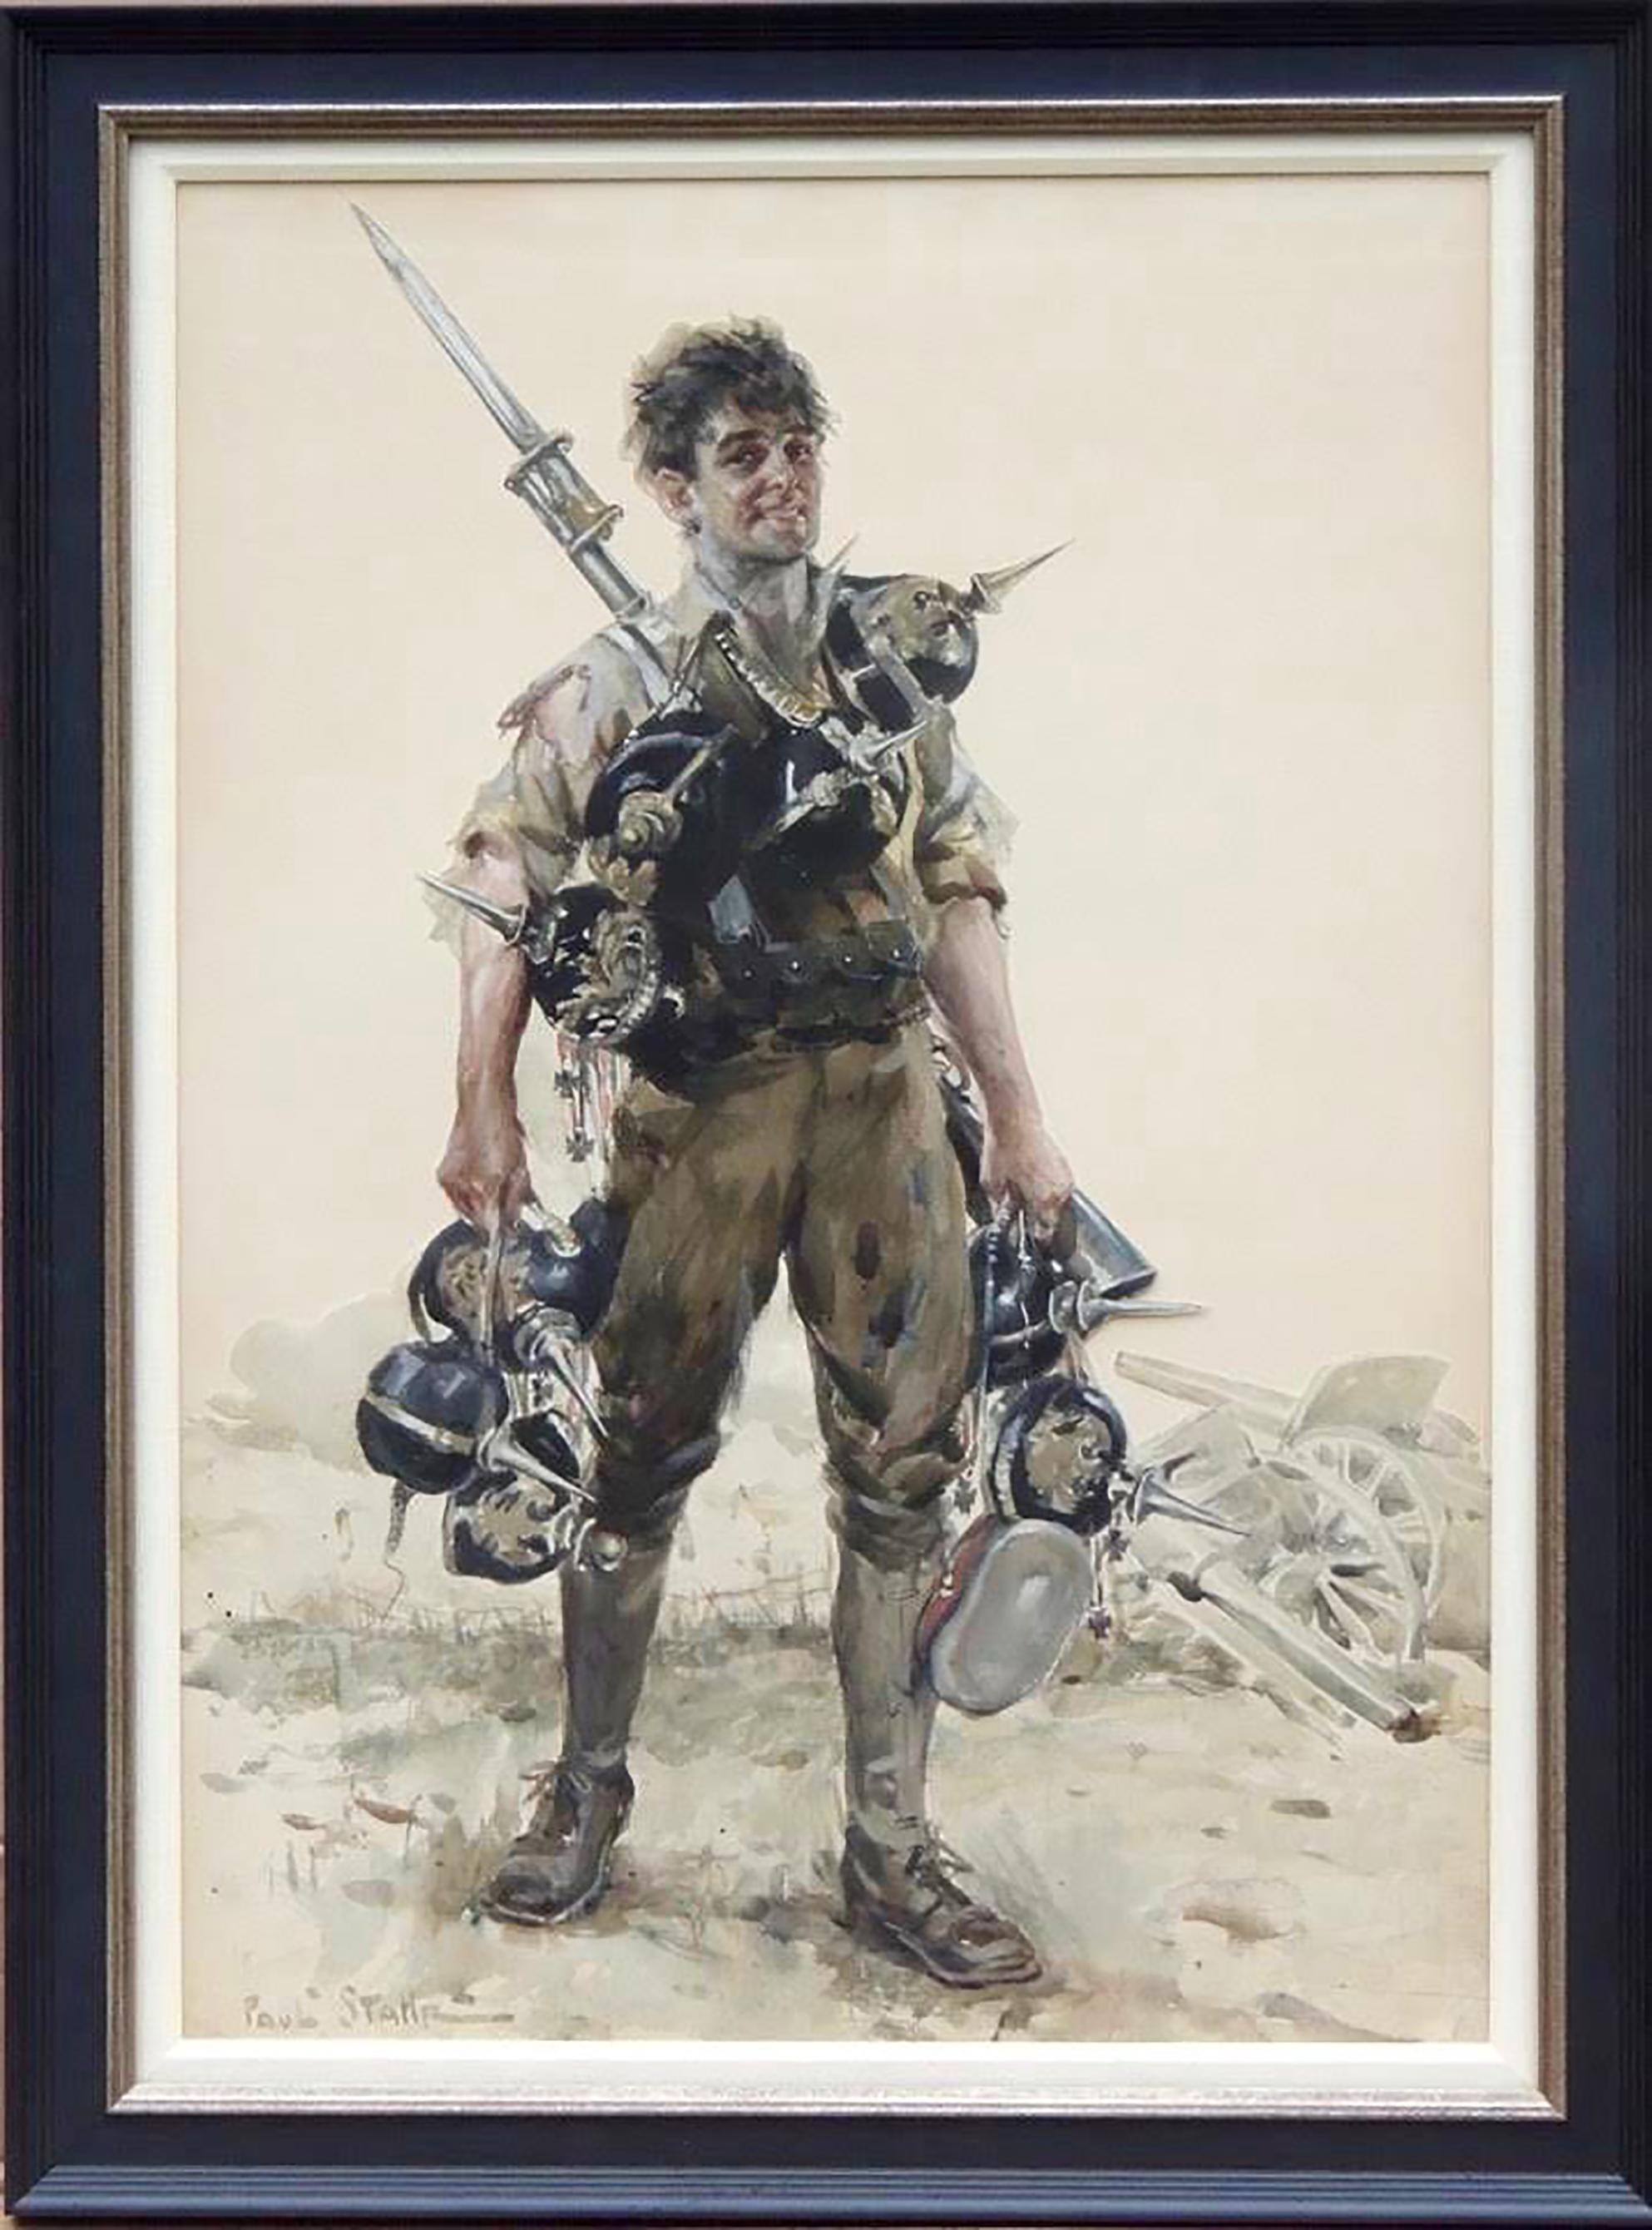 Soldier, Life Magazine Cover - Art by Paul C. Stahr